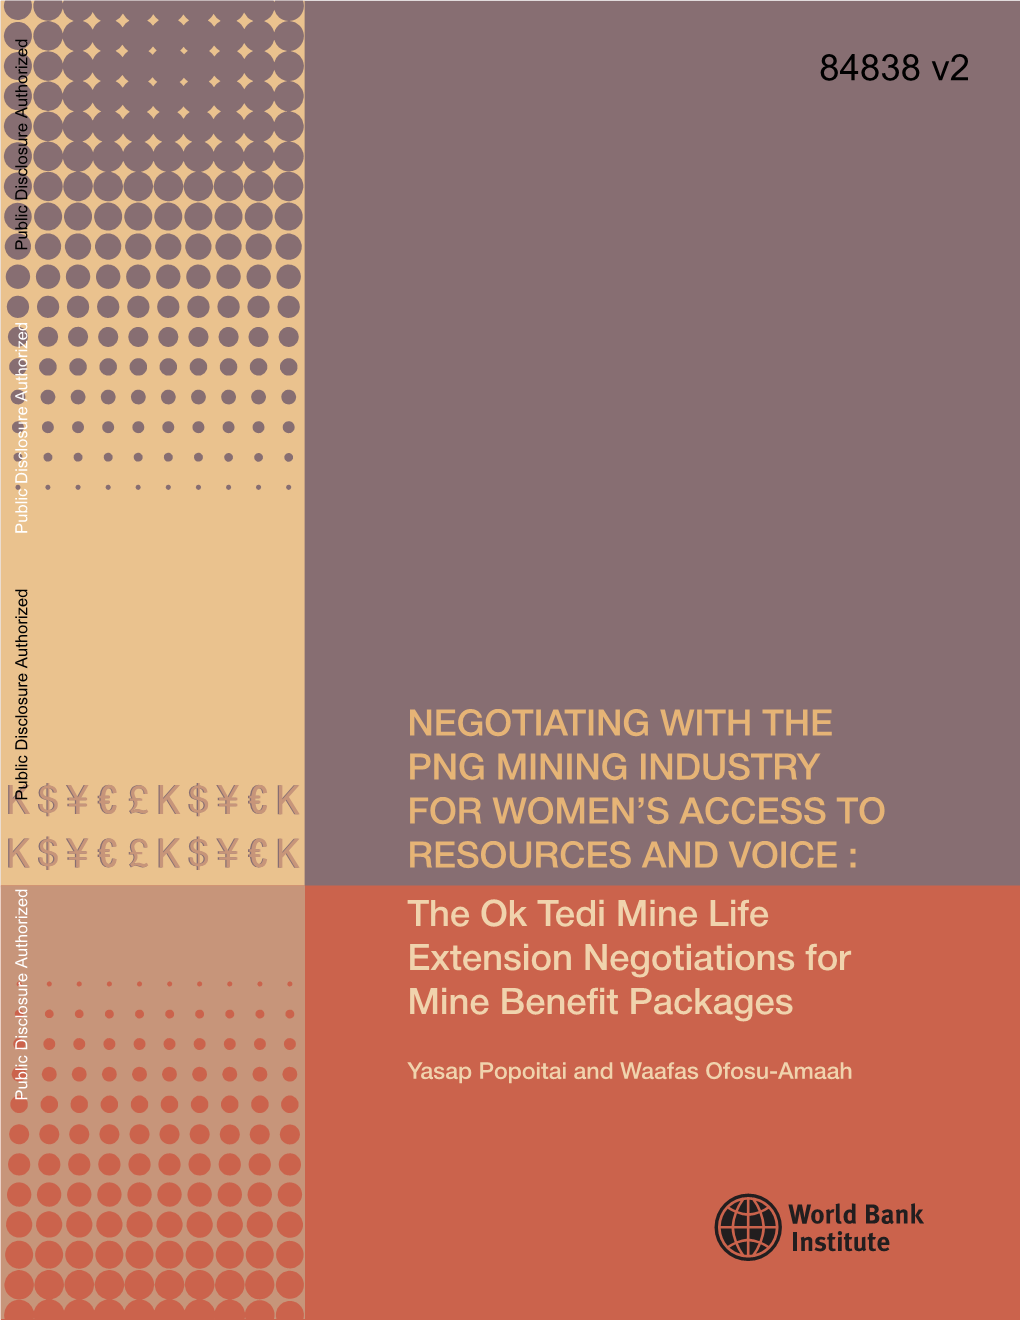 The Ok Tedi Mine Life Extension Negotiations for Mine Benefit Packages